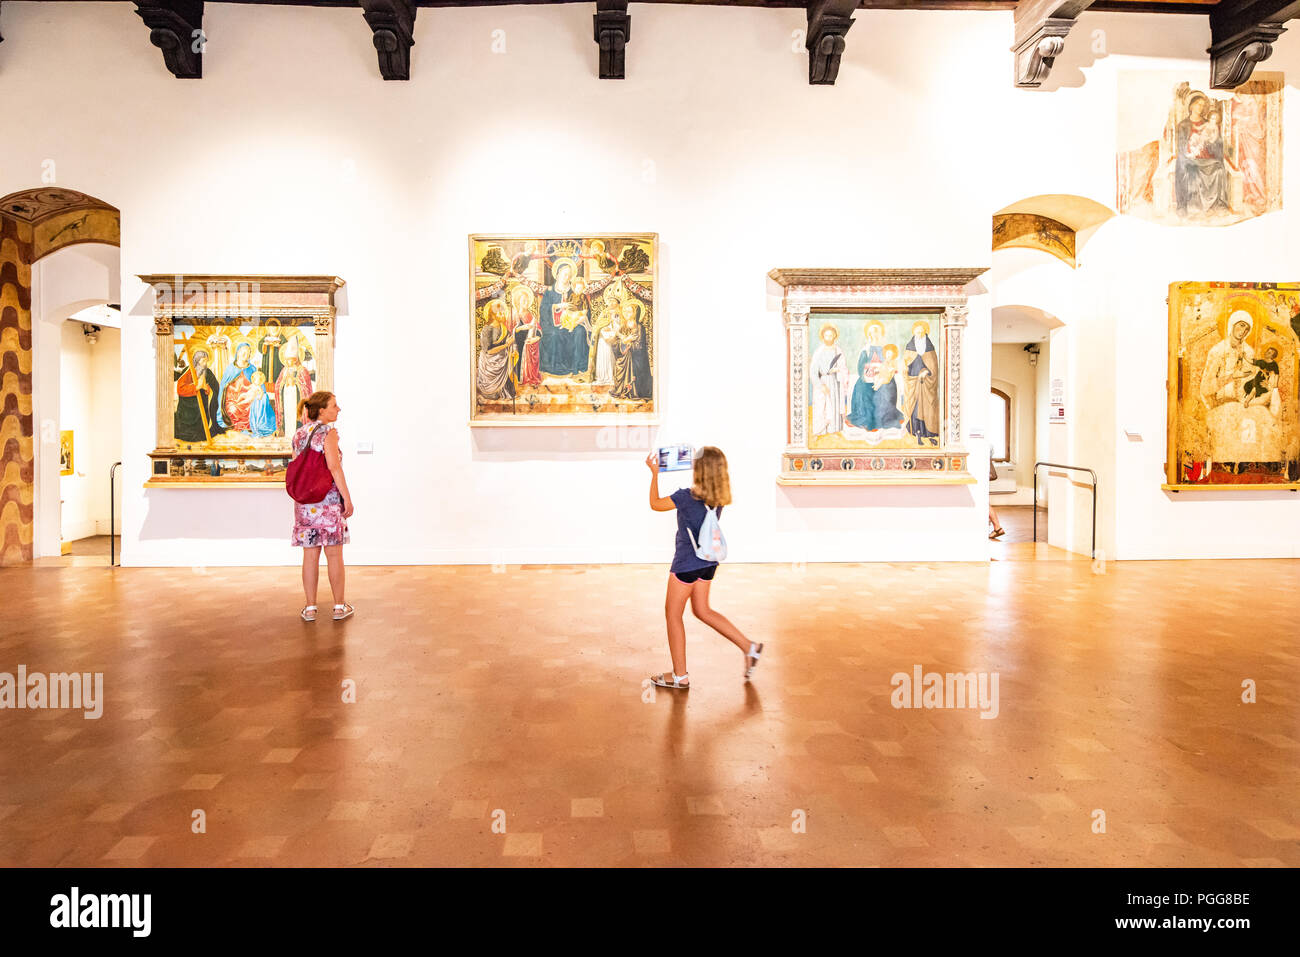 The art gallery within the Torre Grossa in San Gimignano, Italy Stock Photo